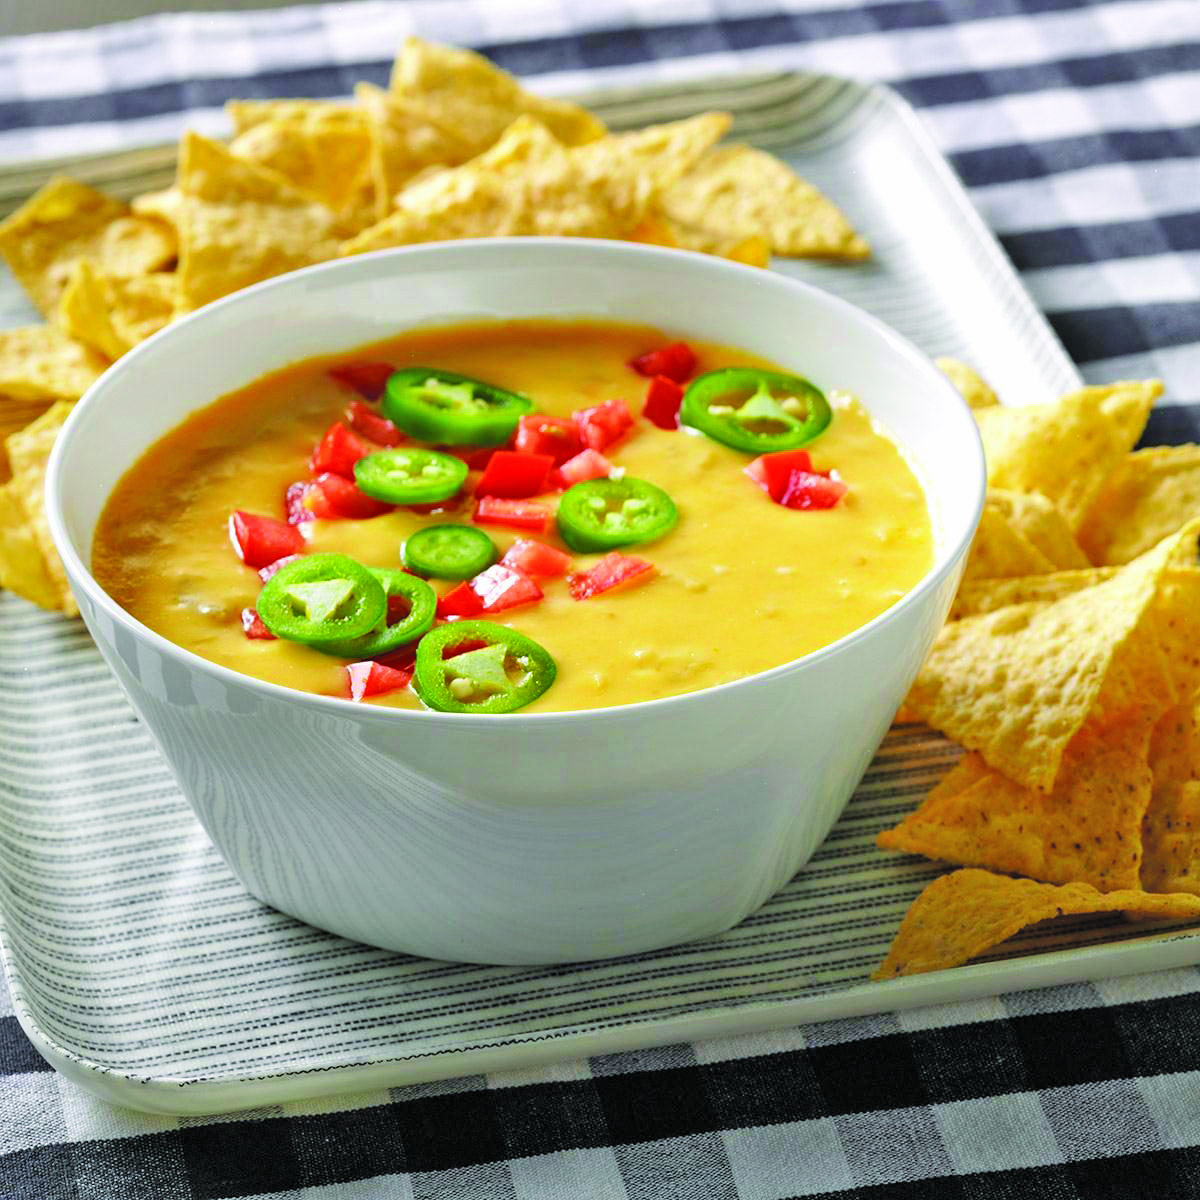 You can make this easy queso recipe spicy or mild for the Super Bowl or any other party.